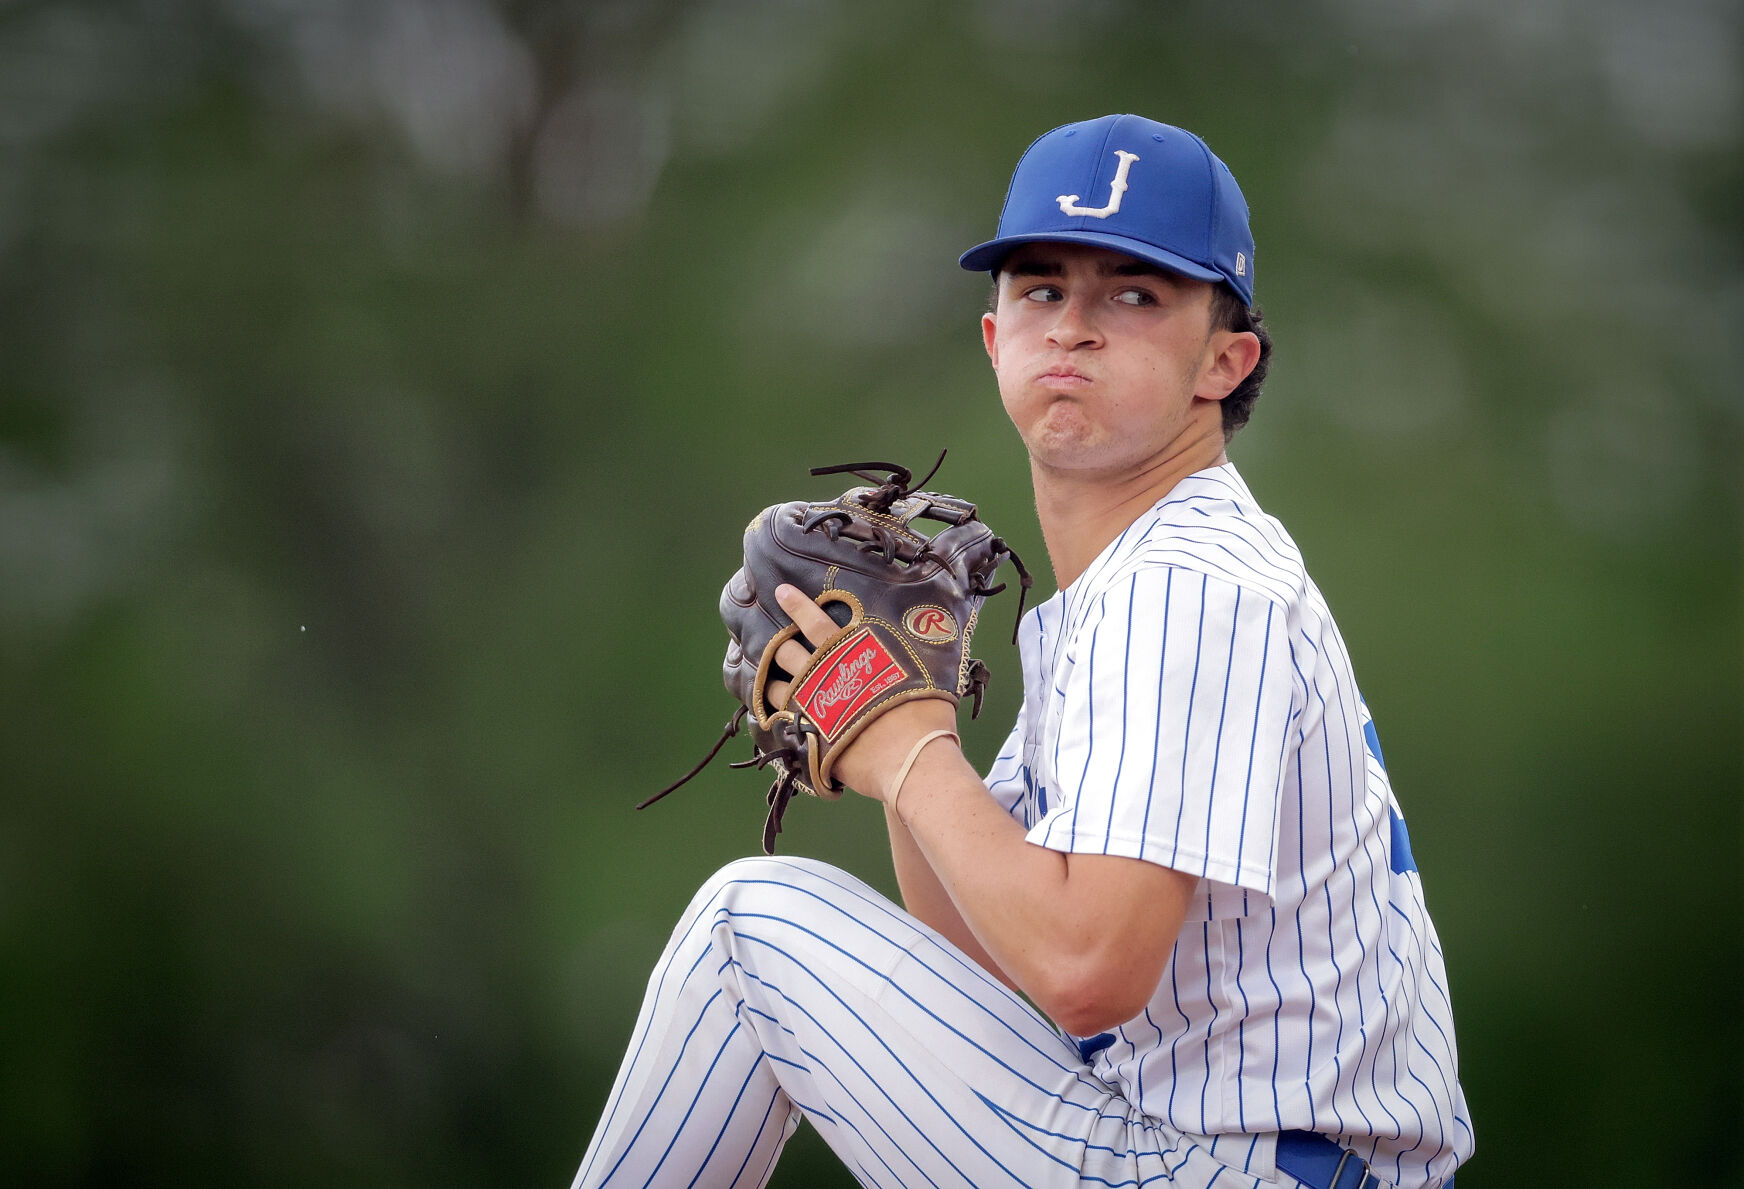 Jesuit advances to quarterfinals after strong pitching leads to sweep of St. Paul’s